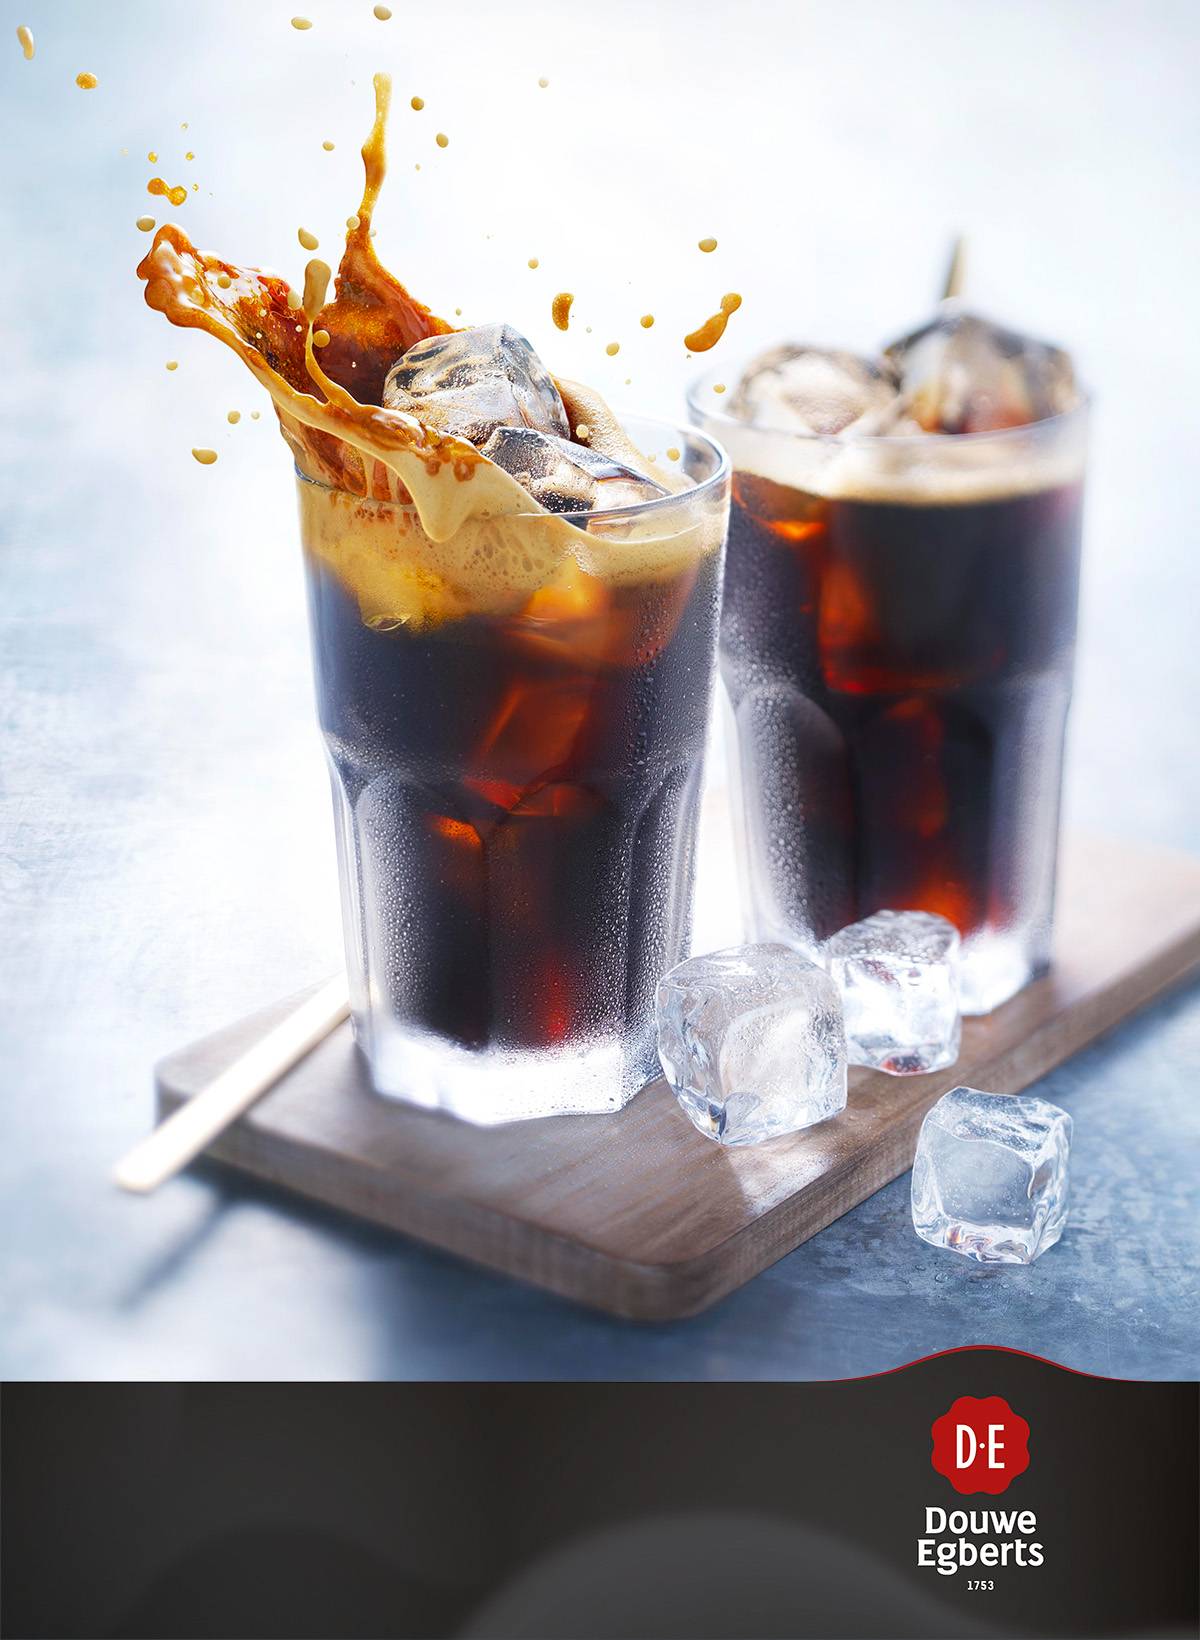 Drinks photography of DE's Ice Coffee made by Studio_m Photography Amsterdam